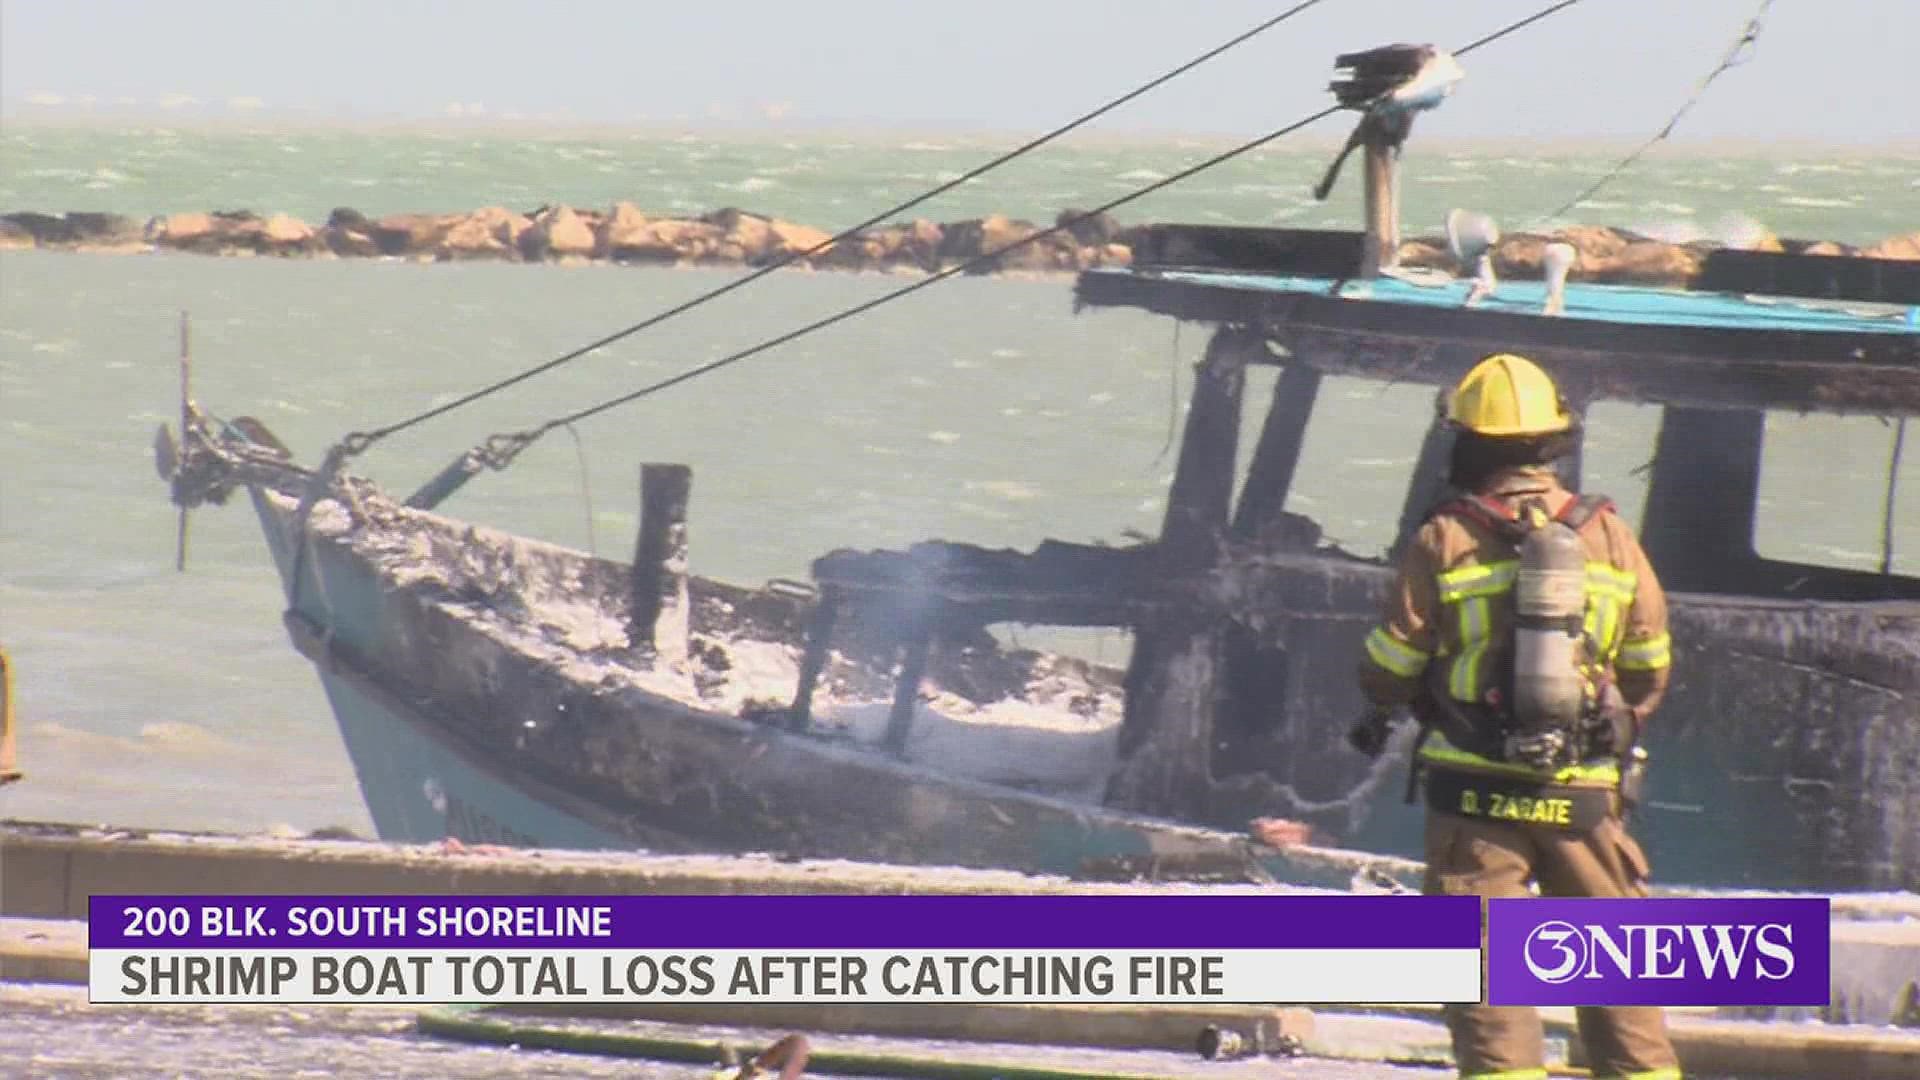 Boom has been deployed to contain the fuel and oil while crews also work to extract it from the water, a news release from the City of Corpus Christi said.